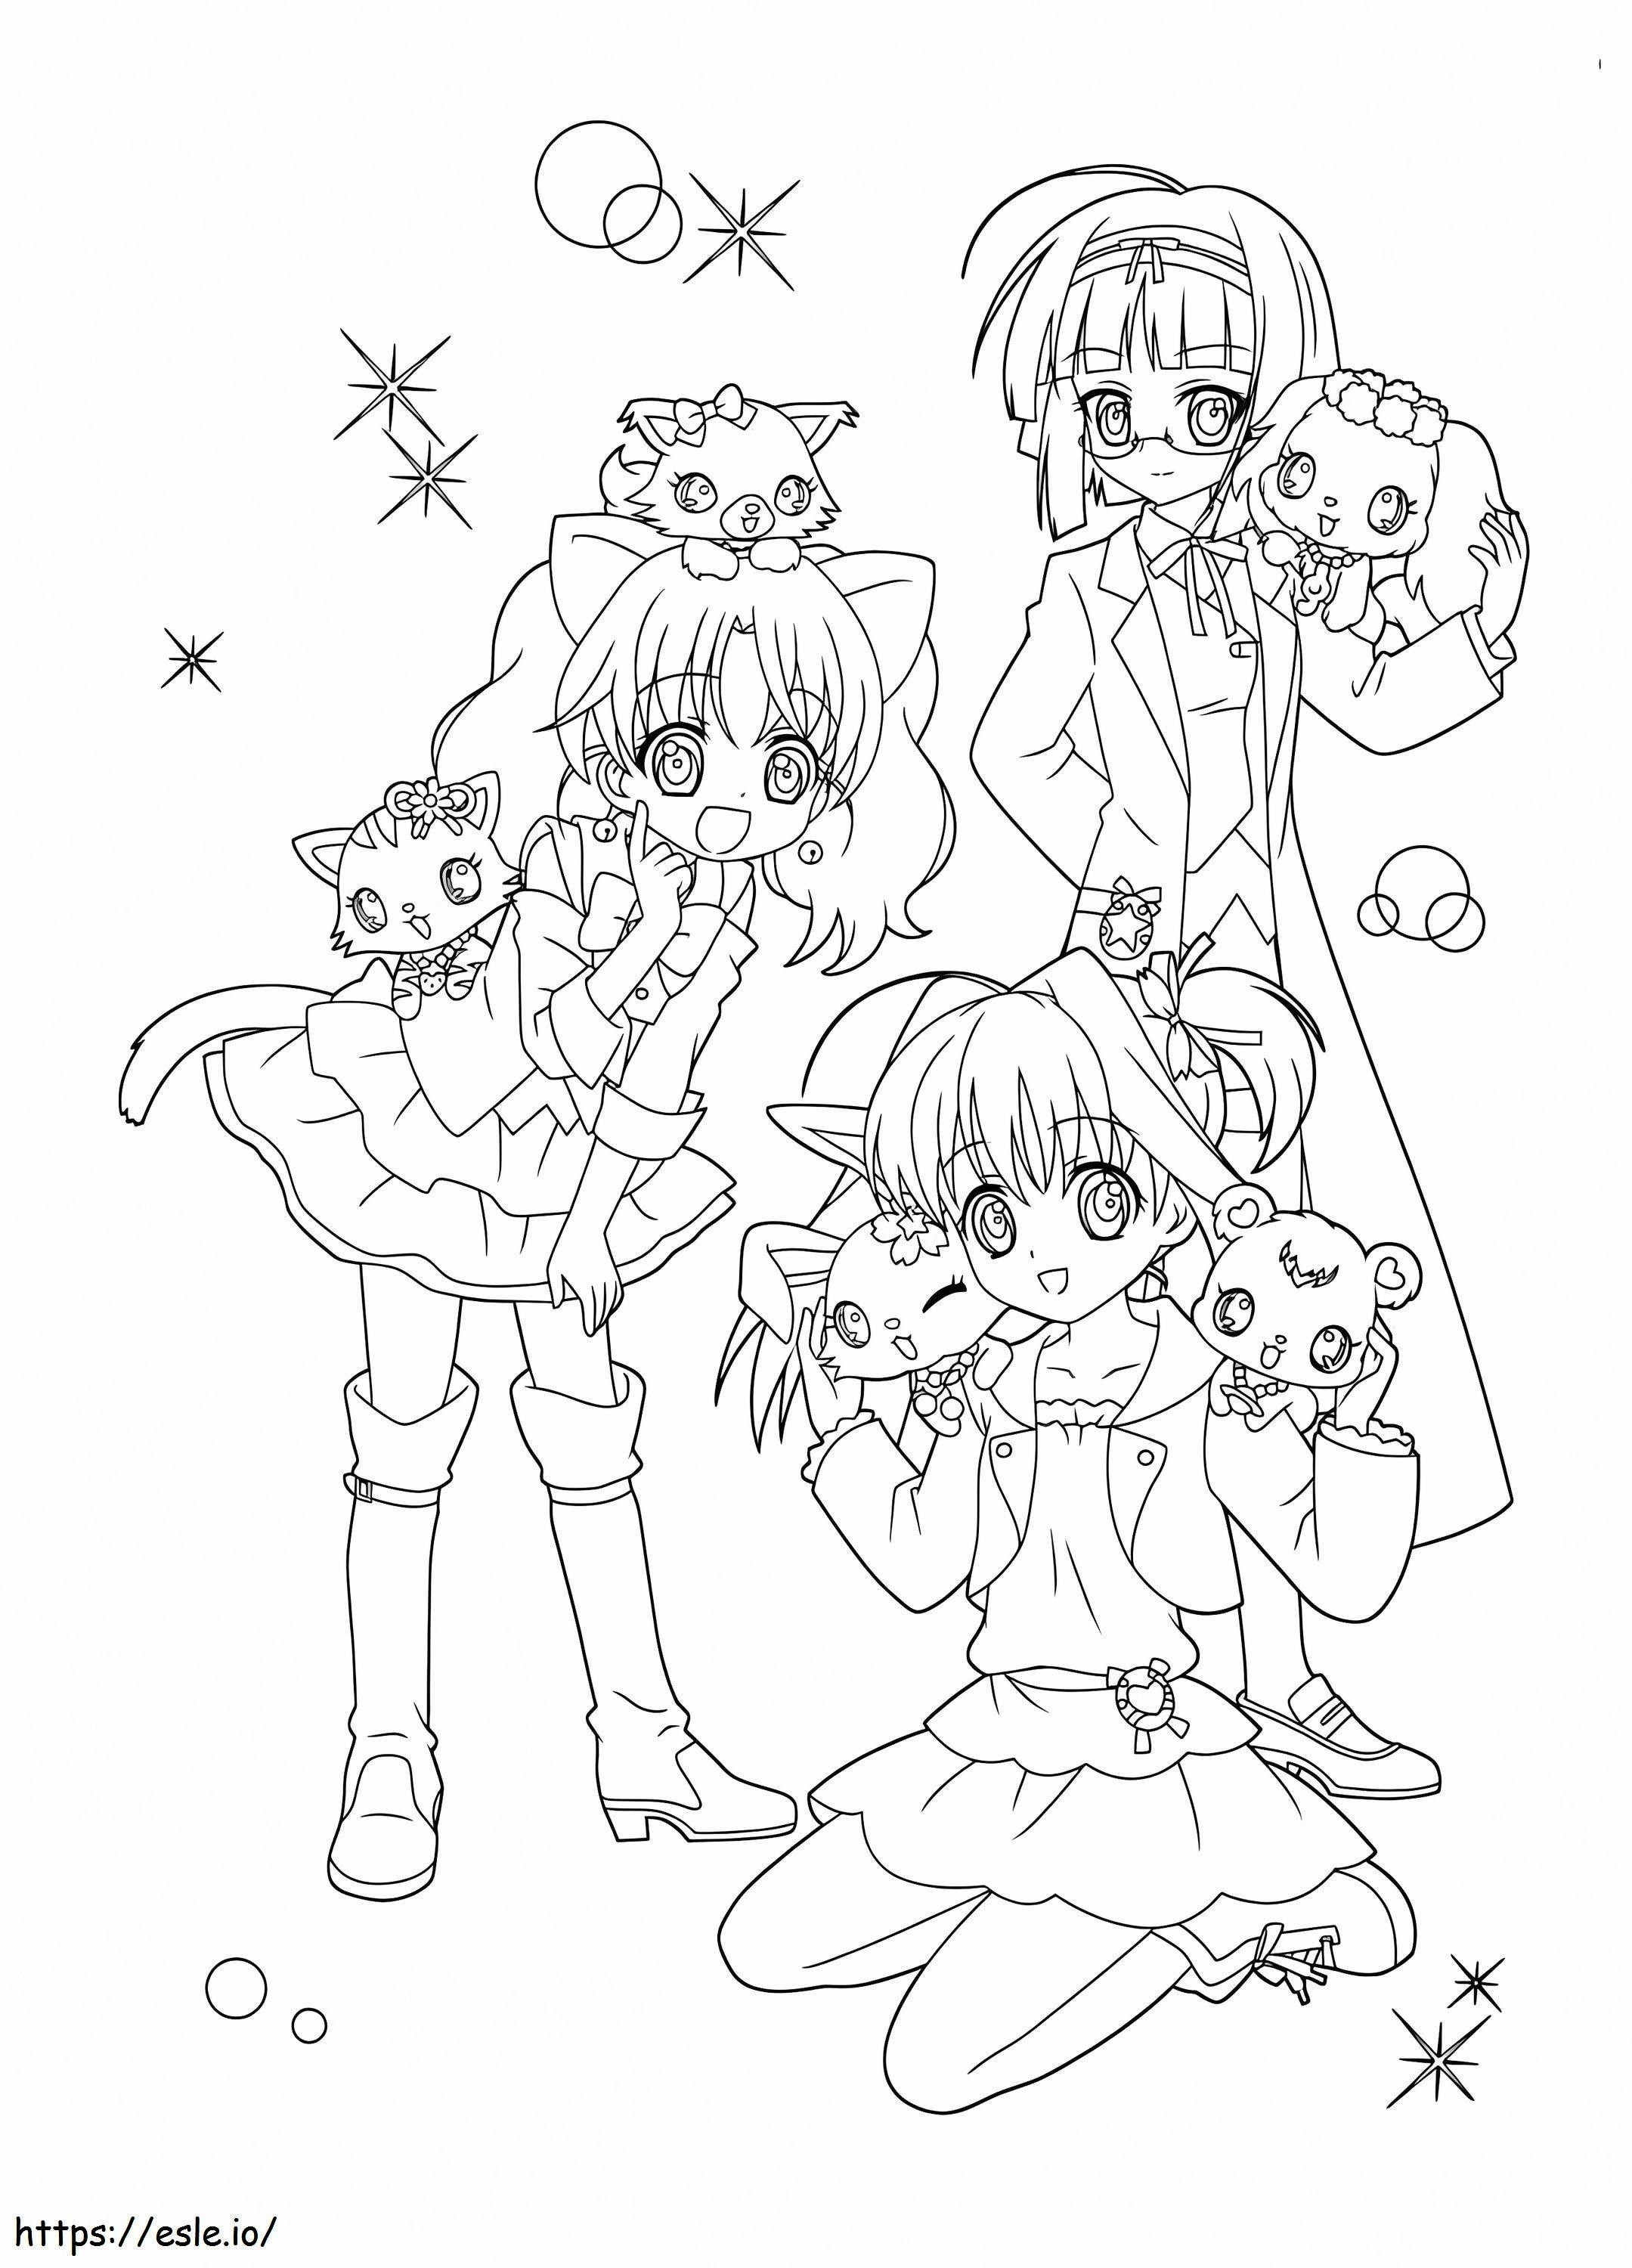 Jewelpets 13 coloring page